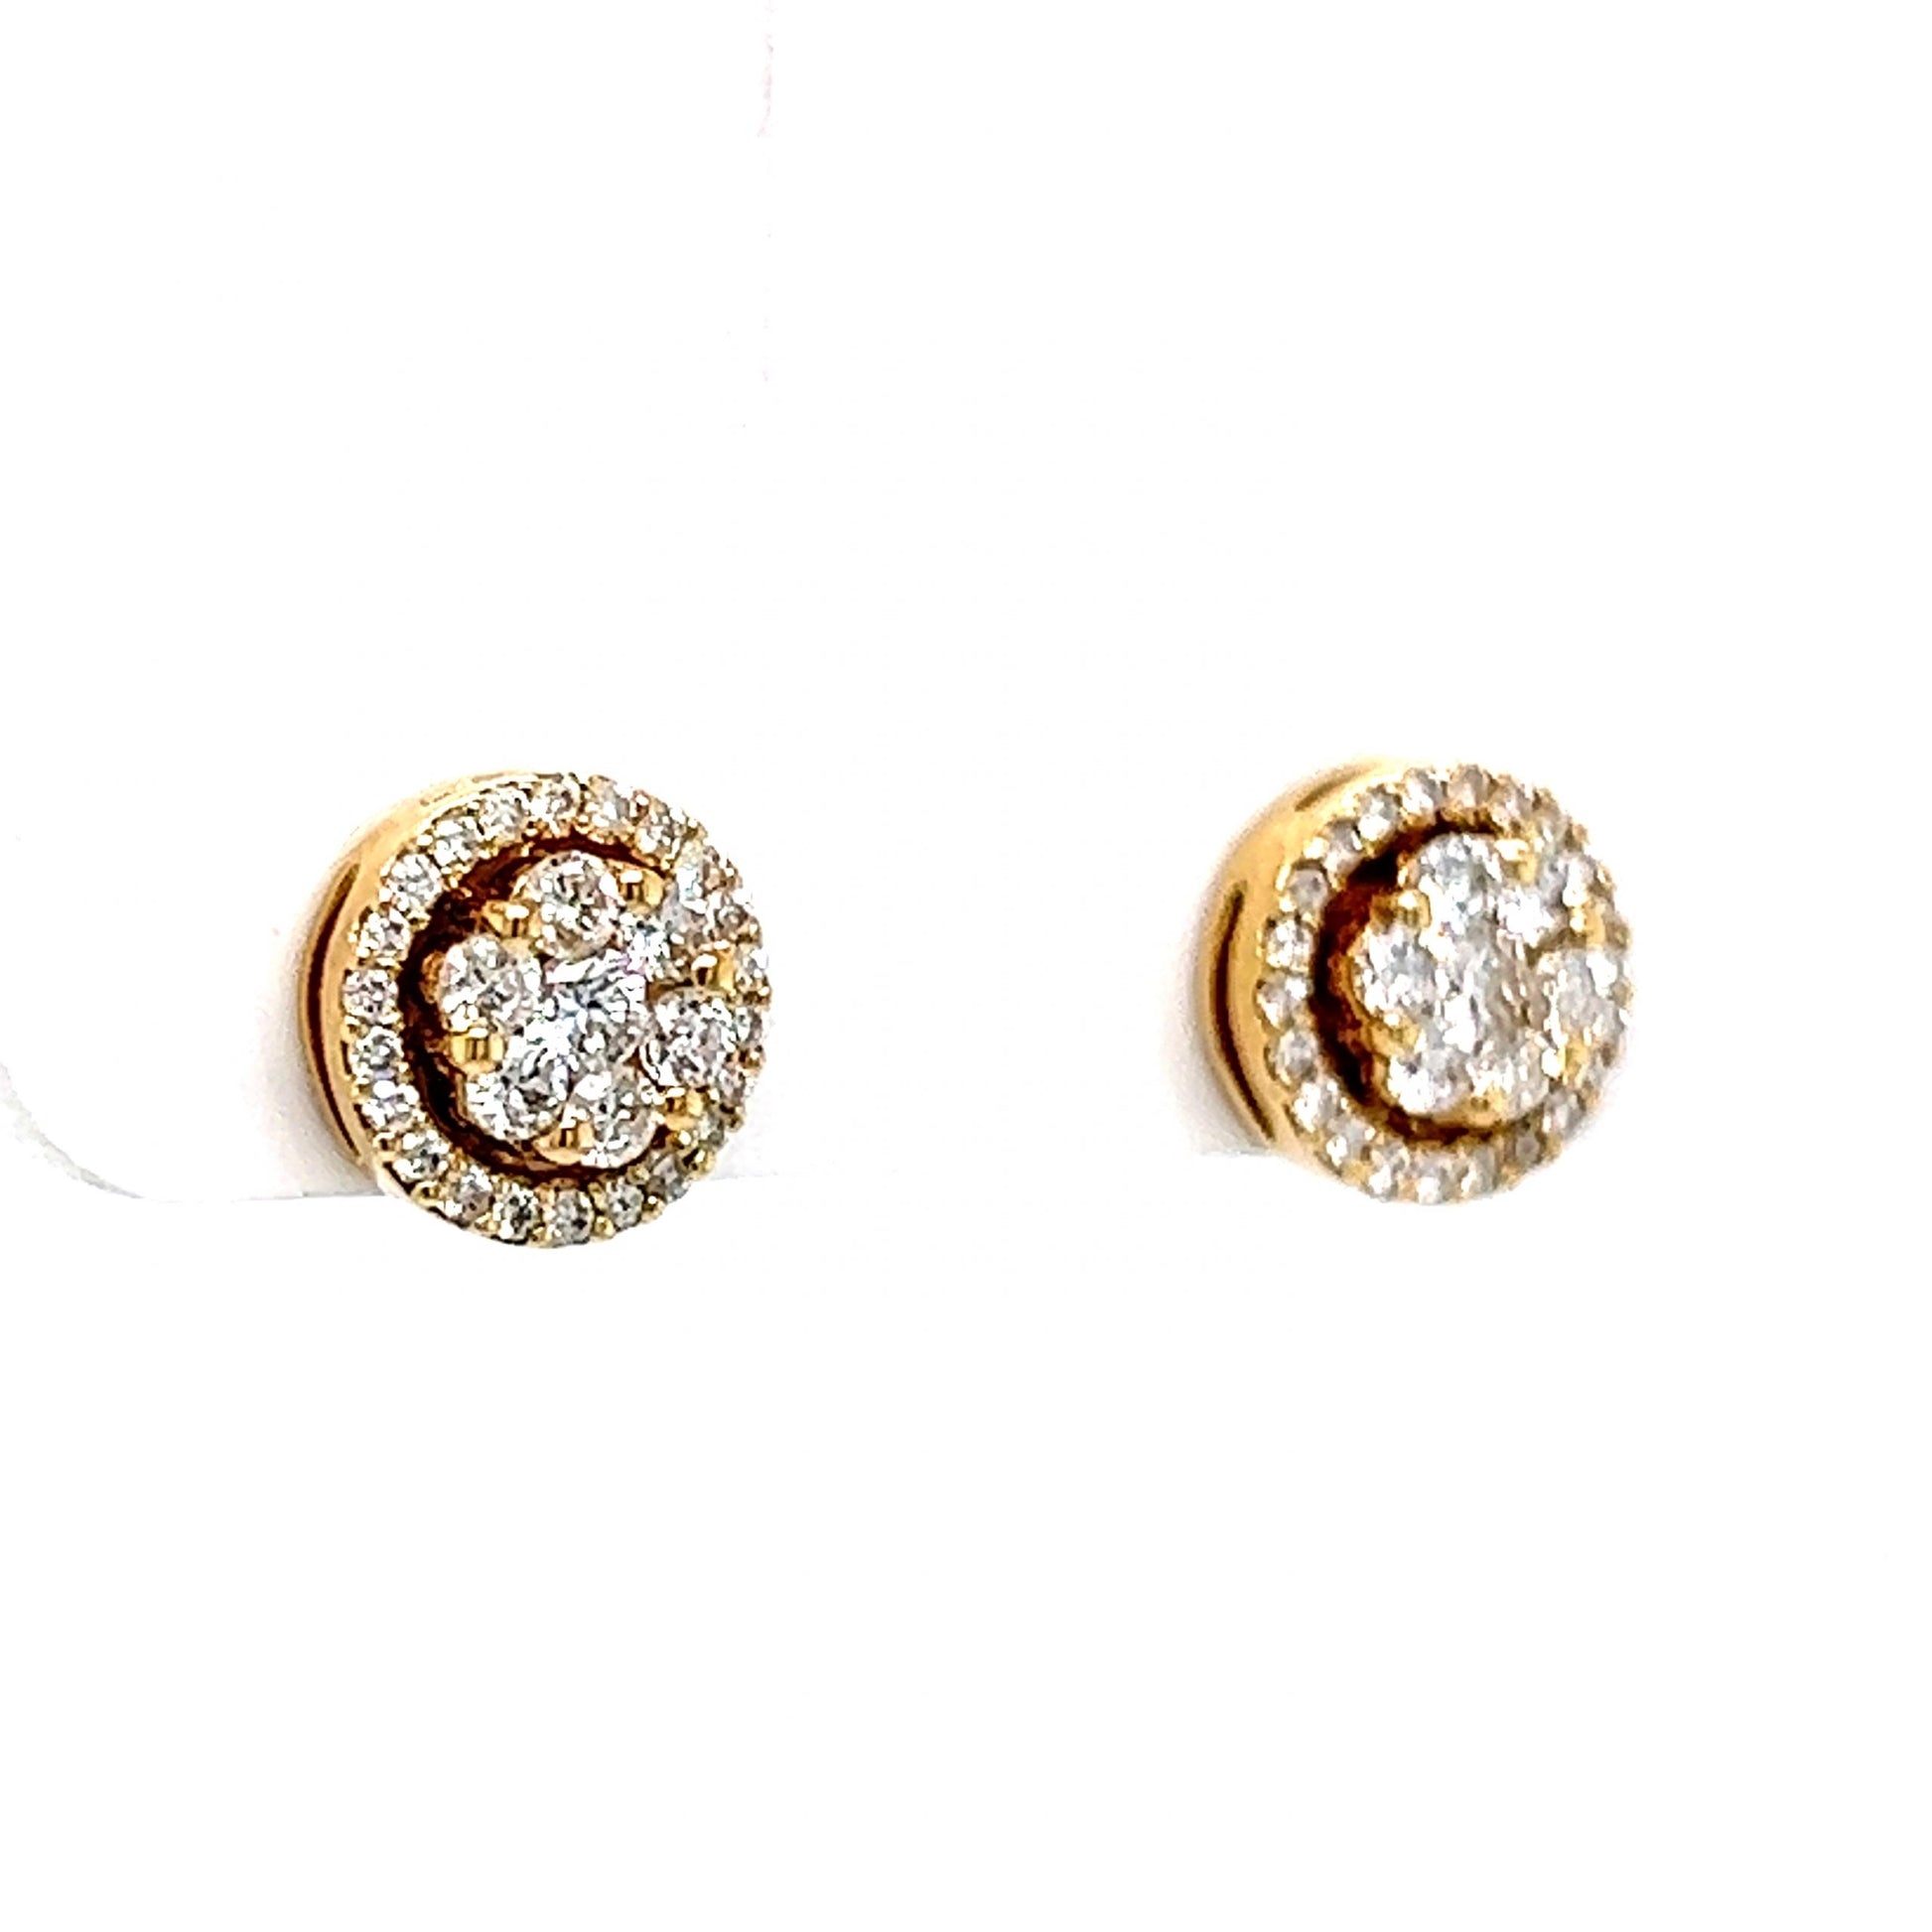 Pave Round Cluster Diamond Stud Earrings in 14k Yellow Gold